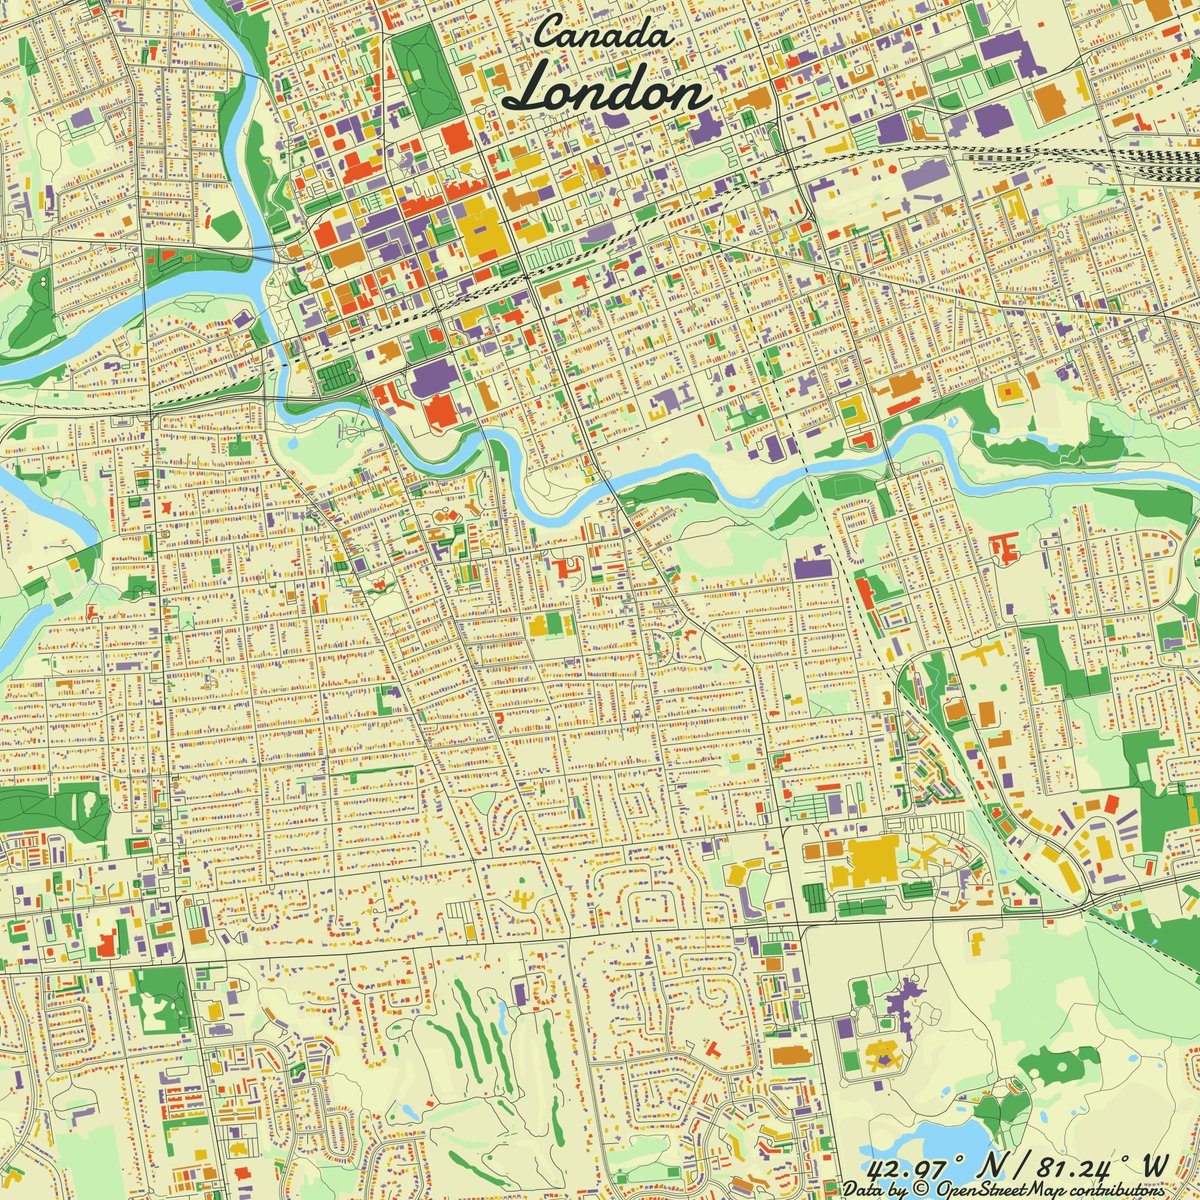 Image of London, Canada created in #rstats using data from #OpenStreetMap.